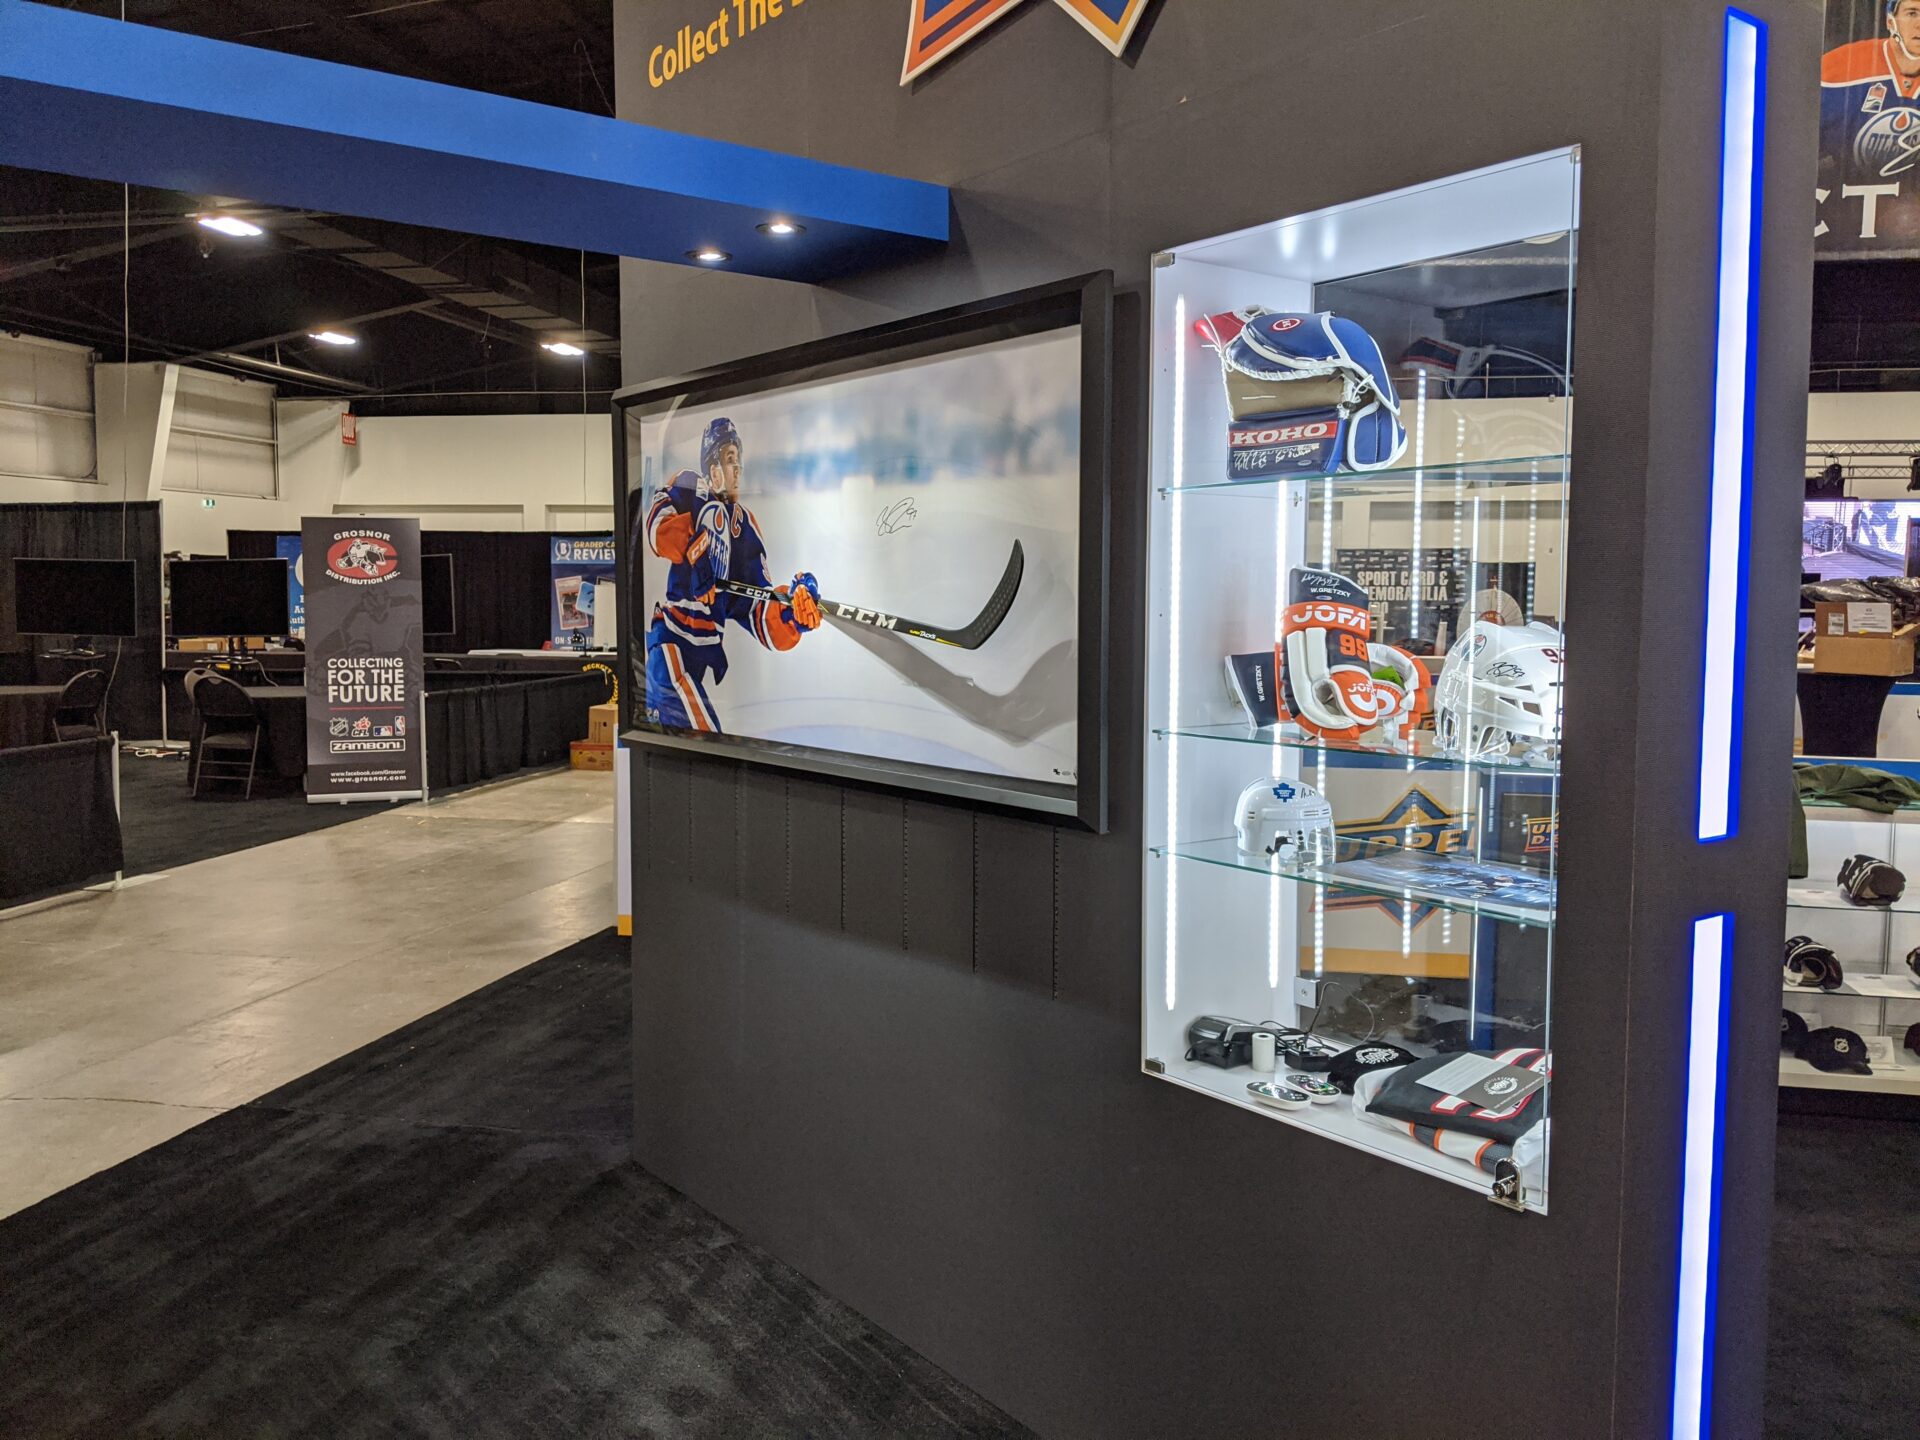 Upper Deck trade show booth with glass exhibits and memorabilia